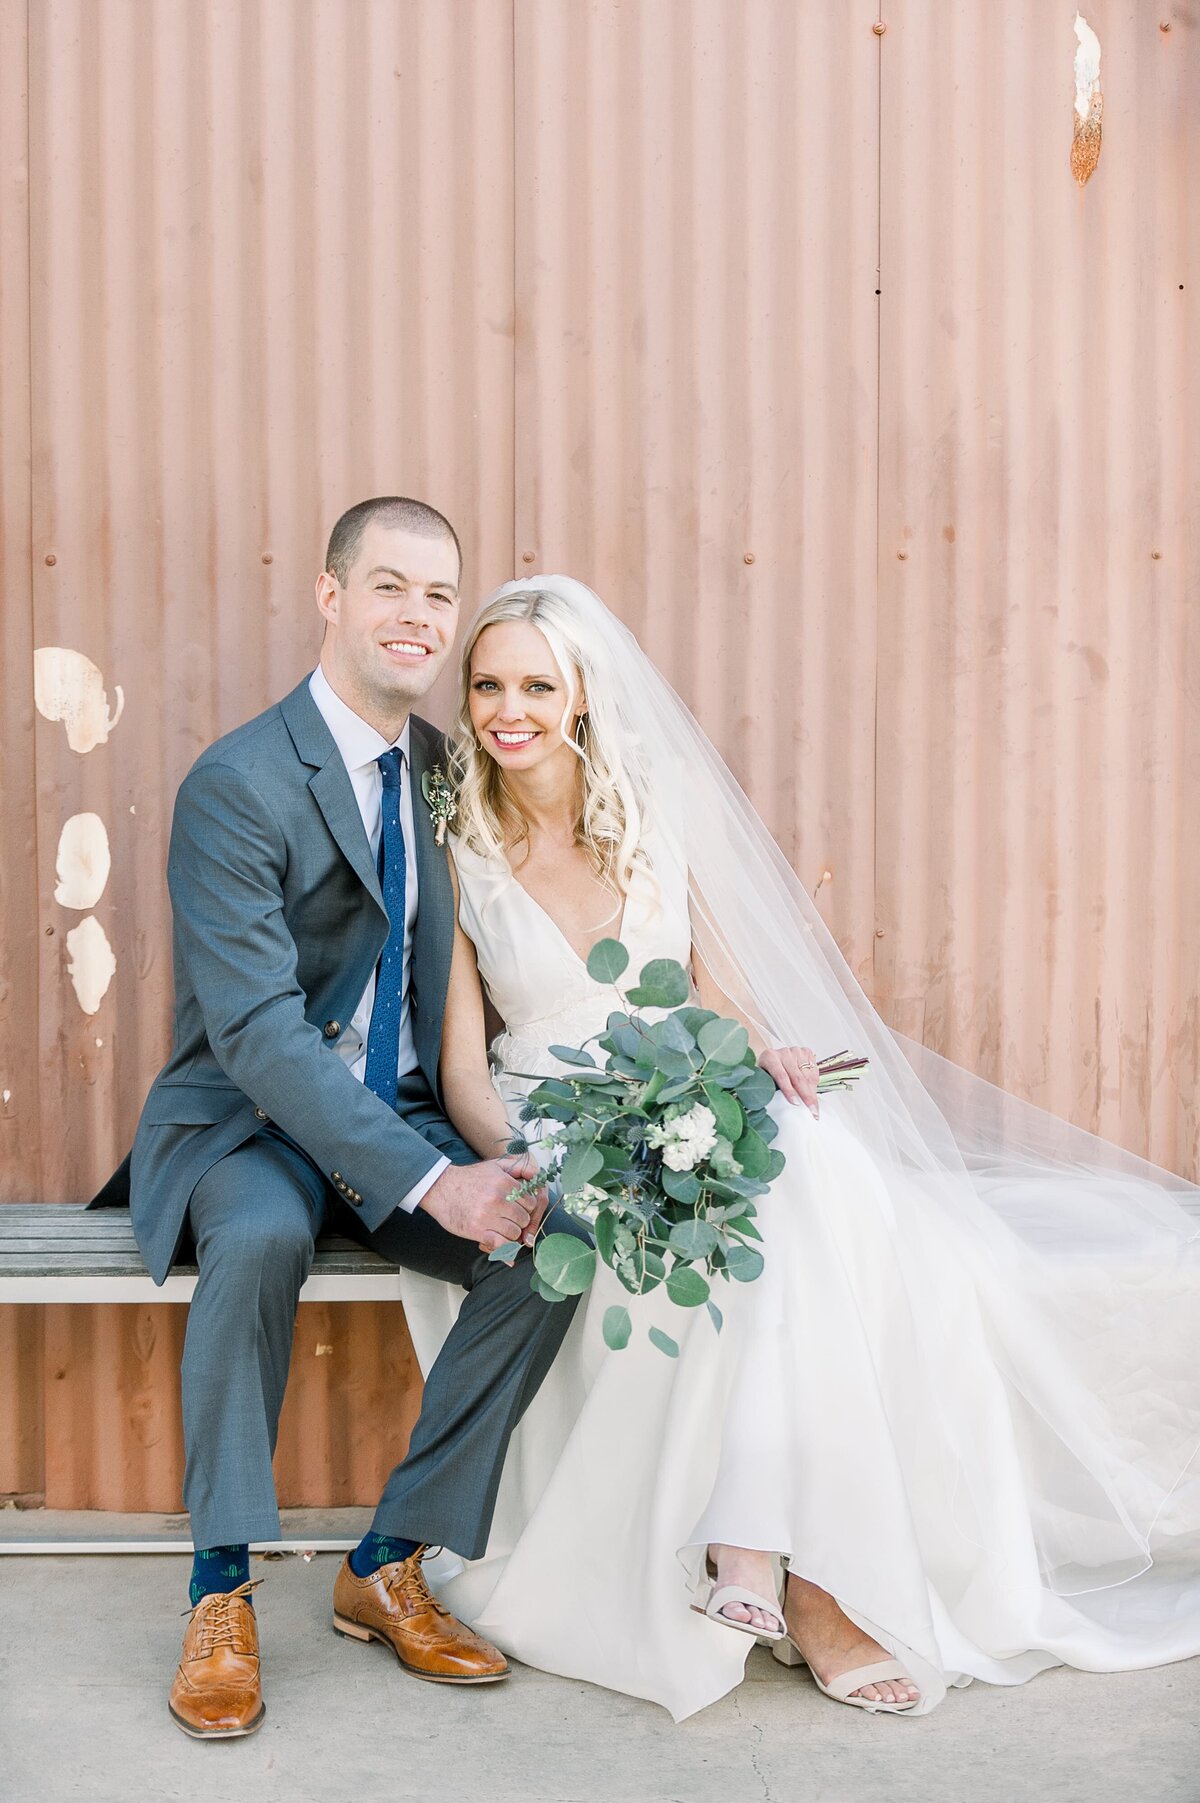 Warehouse-215-wedding-by-Leslie-Ann-Photography-00067